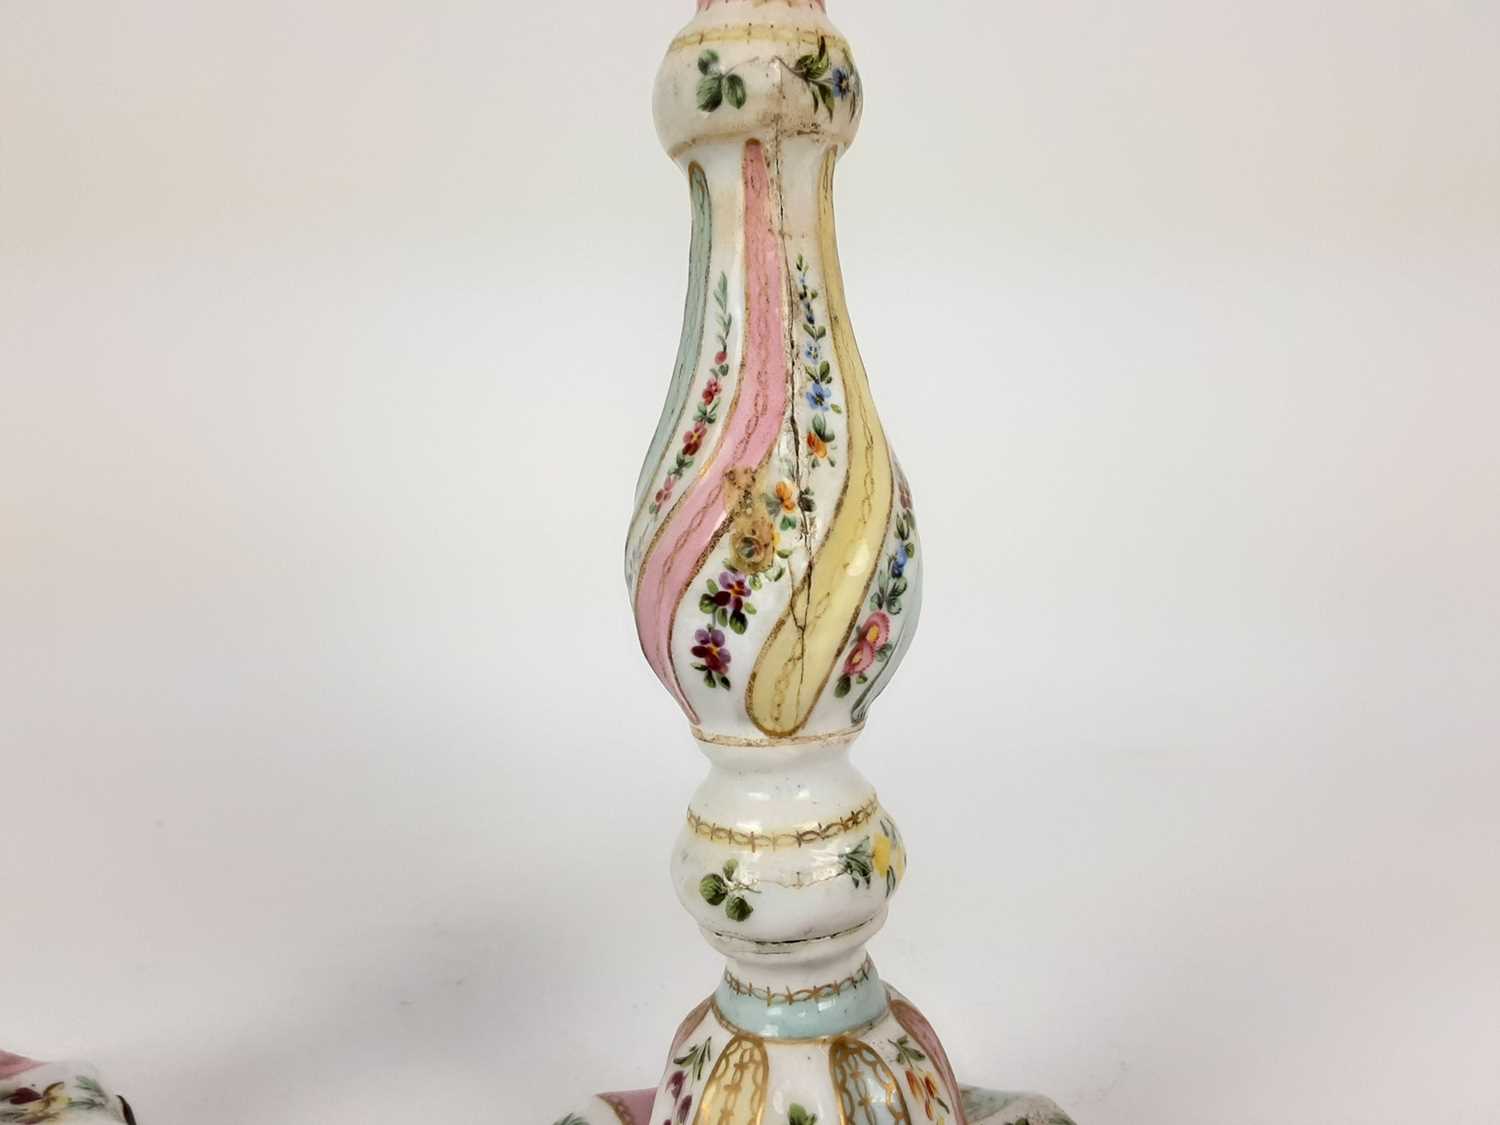 Pair of 18th century enamelled candlesticks, possibly Bilston, with spiralling knopped stems, painte - Image 7 of 7